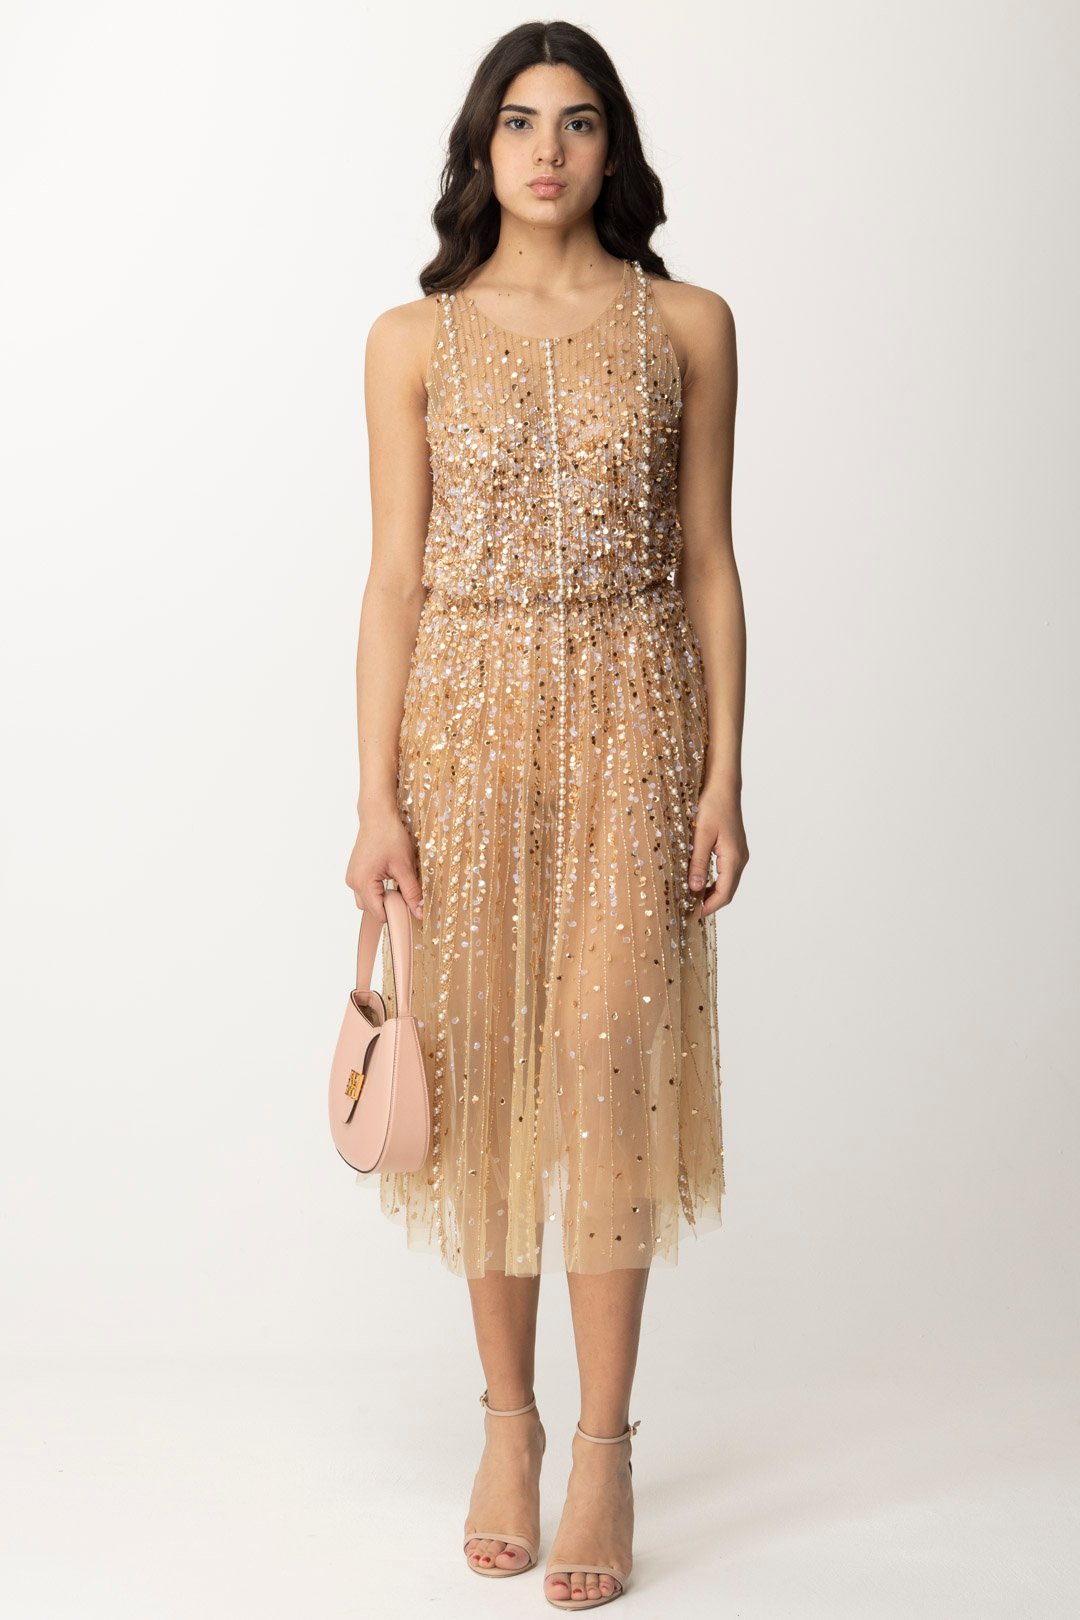 Preview: Elisabetta Franchi Midi Dress in Embroidered Tulle Nudo